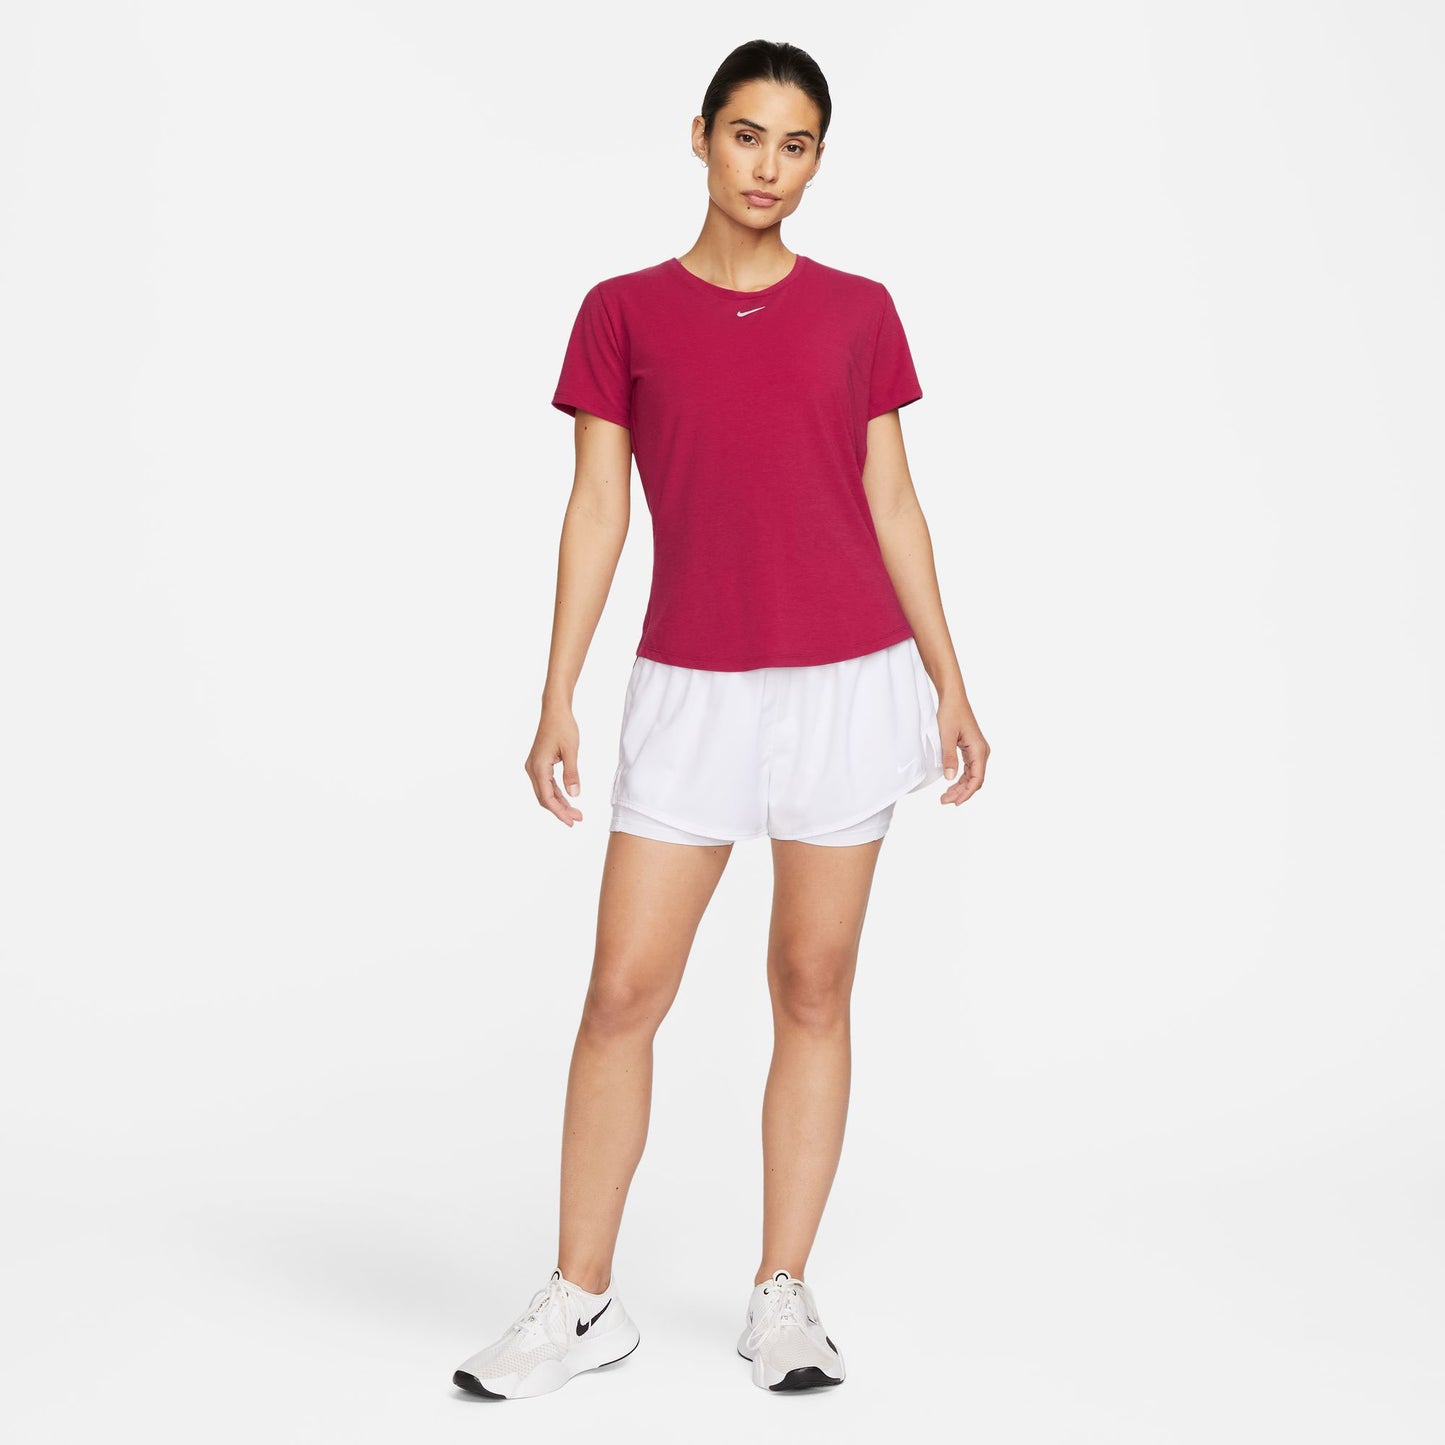 Nike One Luxe Dri-FIT Women's Standard Fit Shirt Red (5)